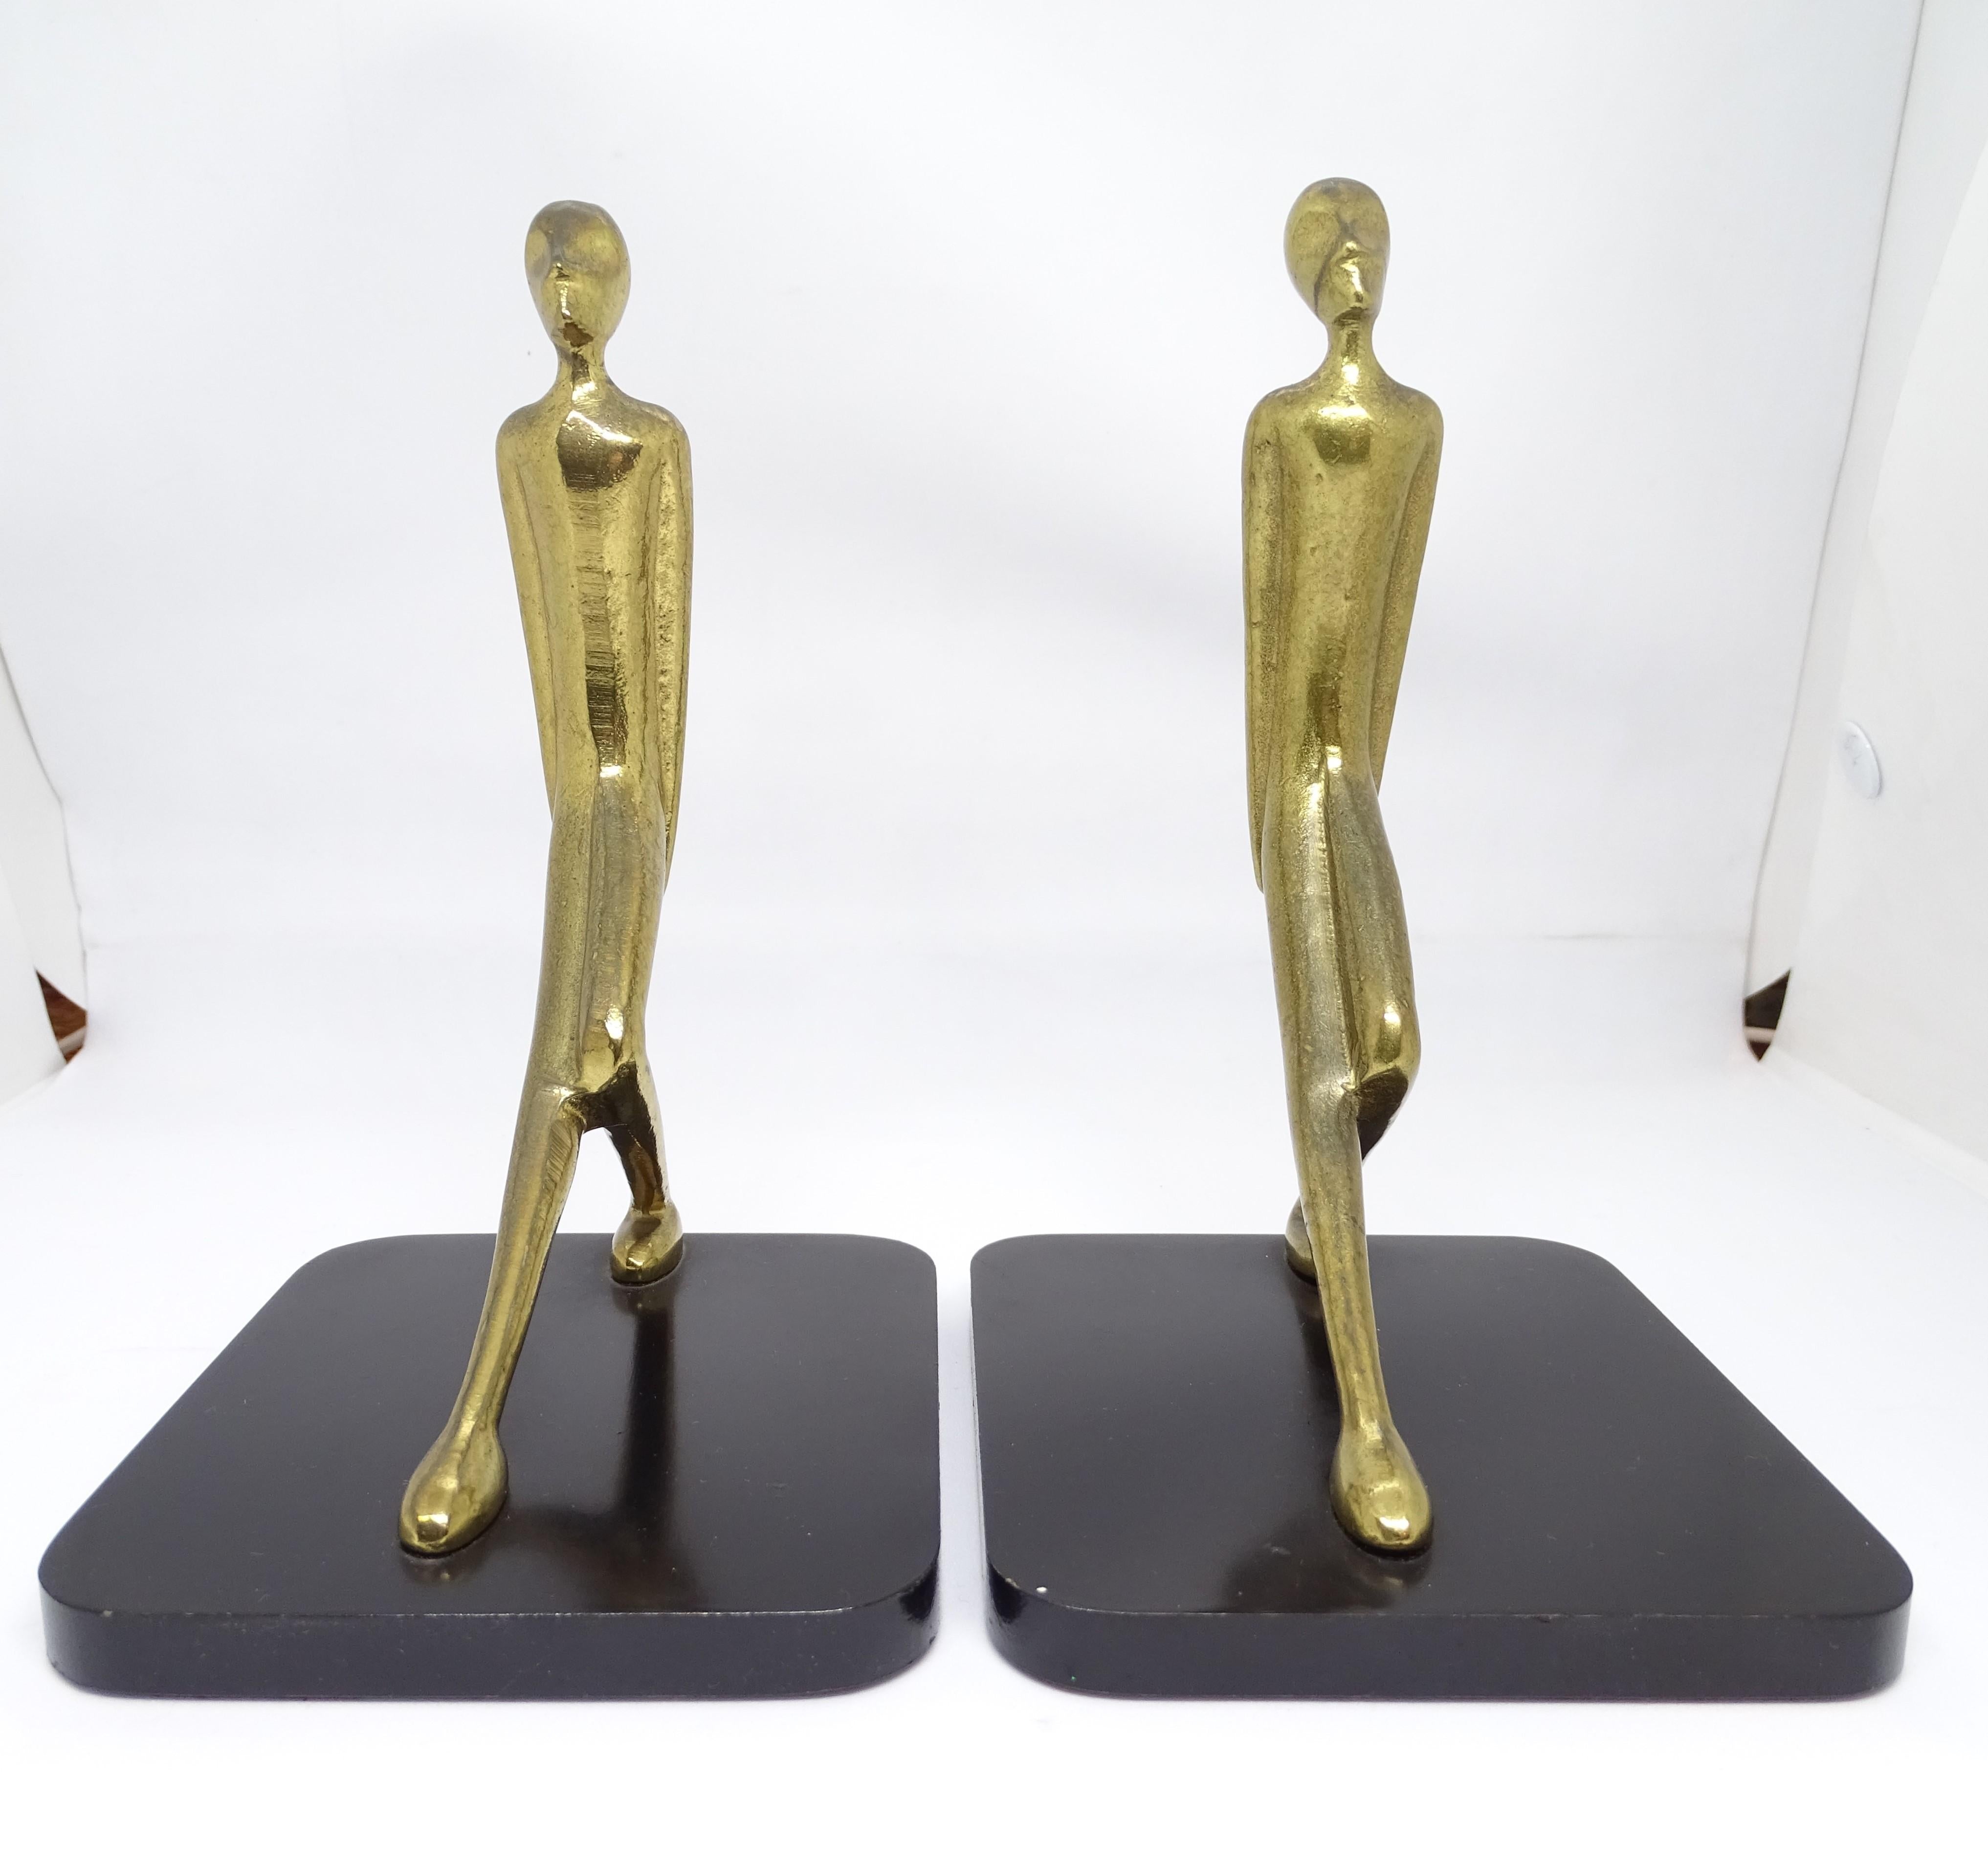 Gorgeous pair of bronze sculptures by the Austrian master of Art Deco, Karl Hagenauer.

Karl Hagenauer (1898-1956) was an influential Austrian designer belonging to the Art Deco school. He began training him at the age of eleven at The Vienna School